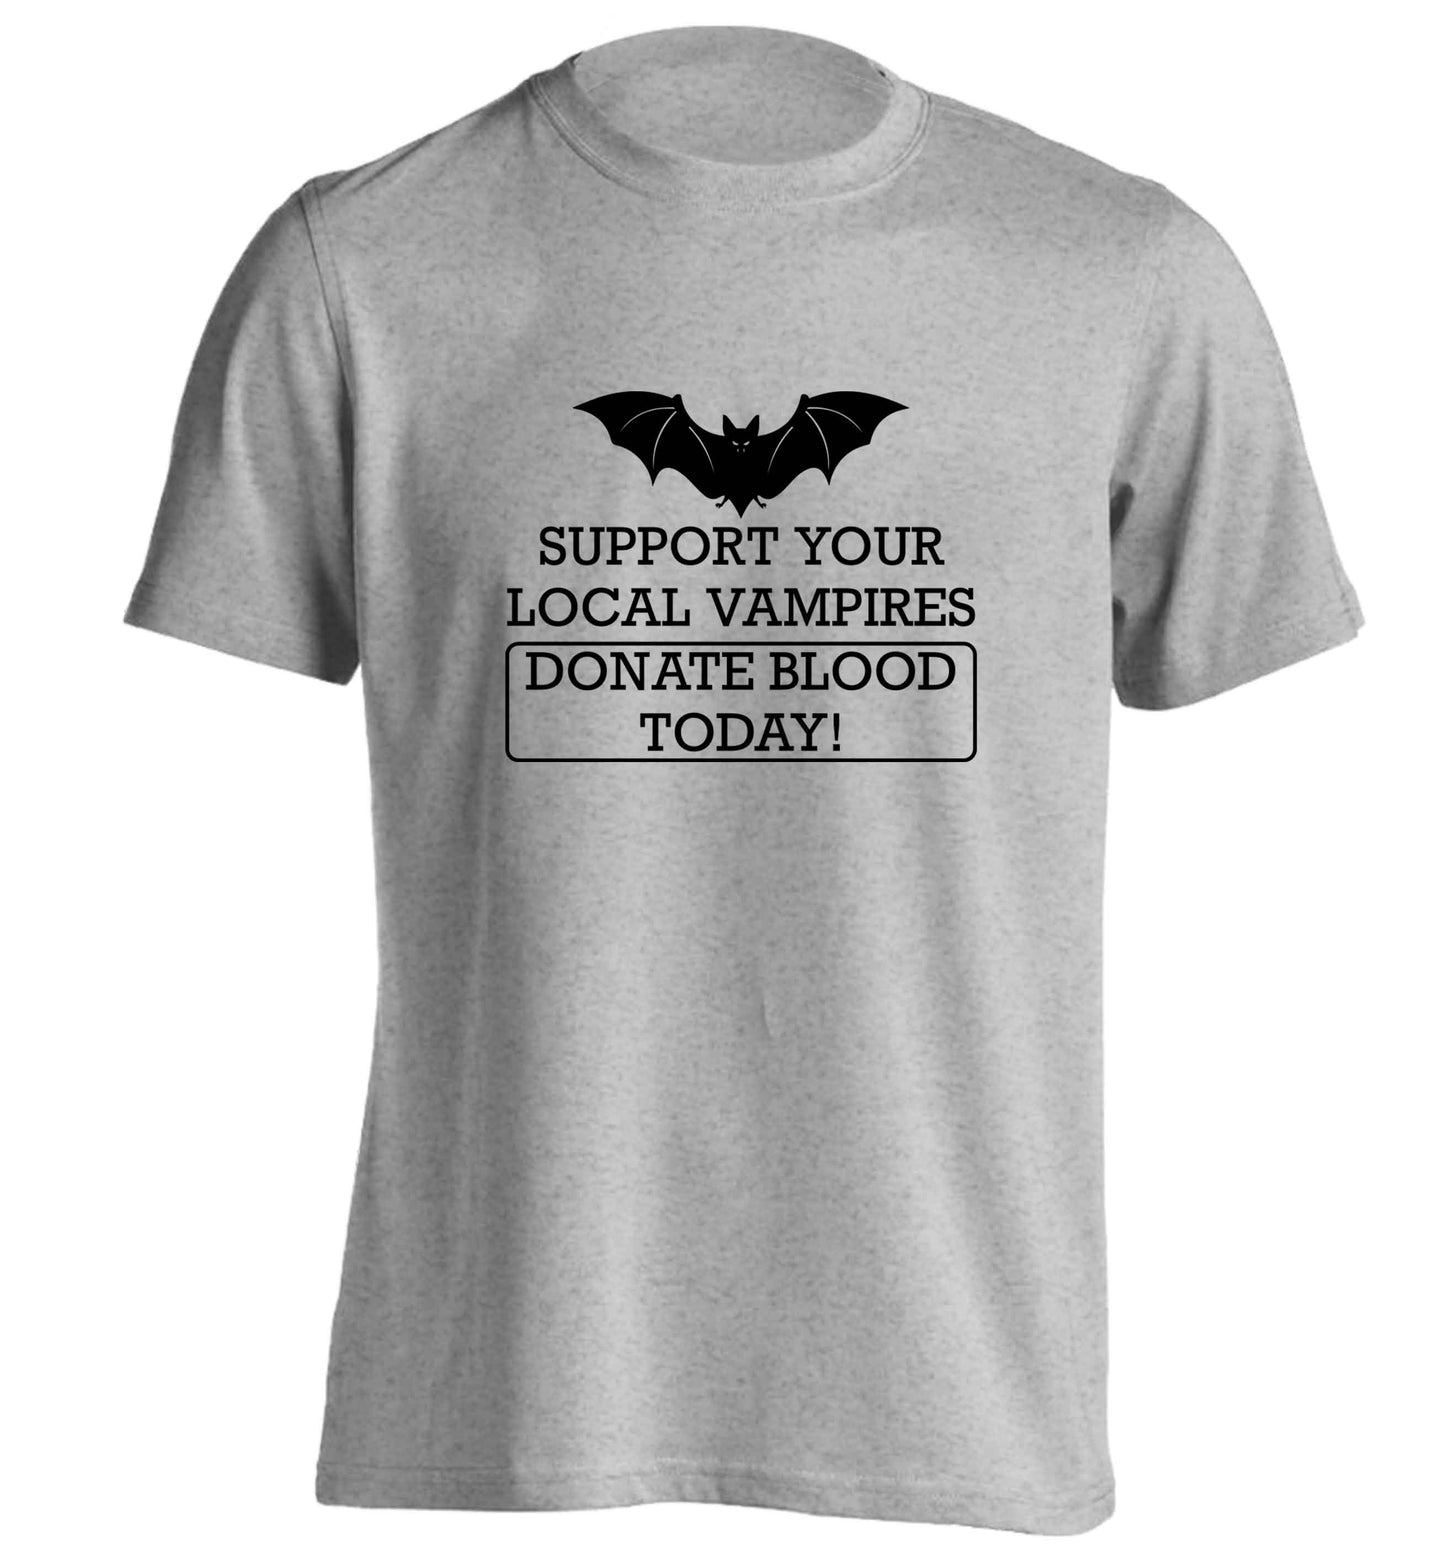 Support your local vampires donate blood today! adults unisex grey Tshirt 2XL